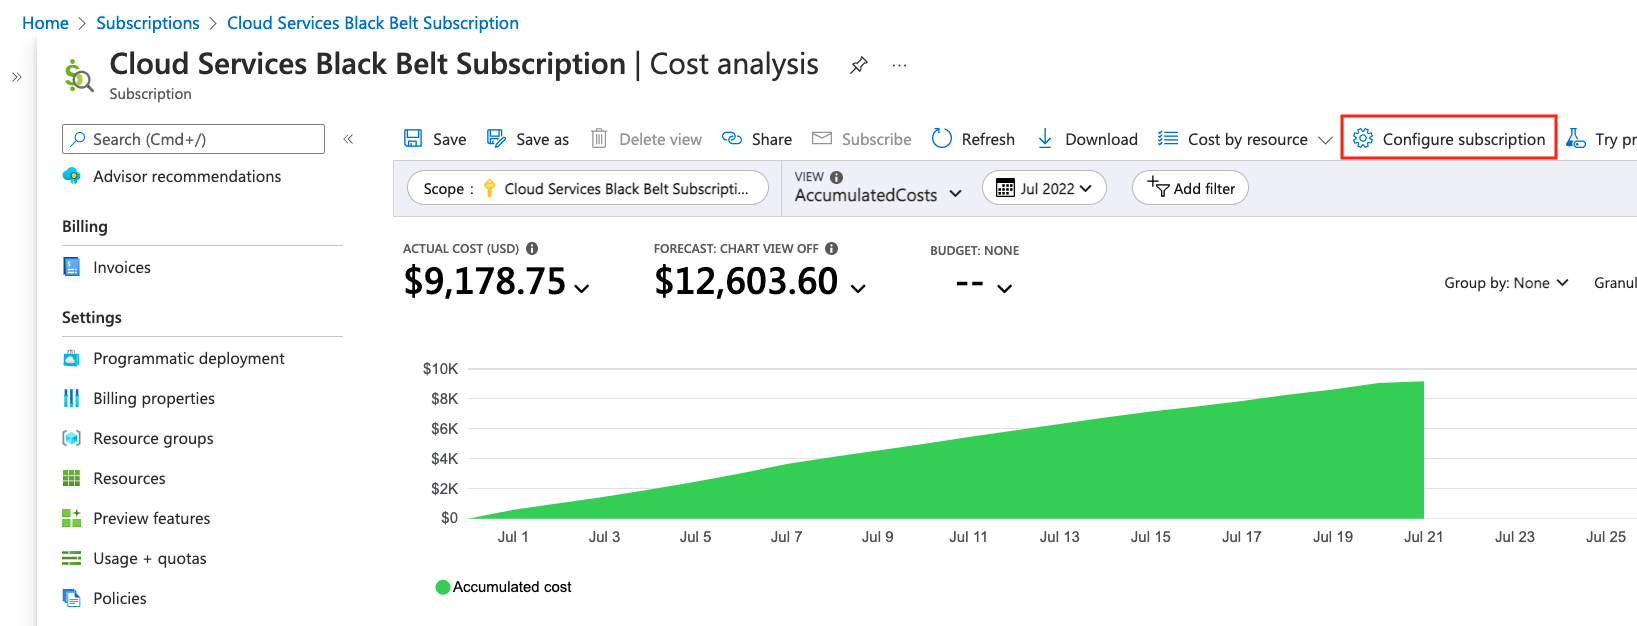 Cost Analysis view